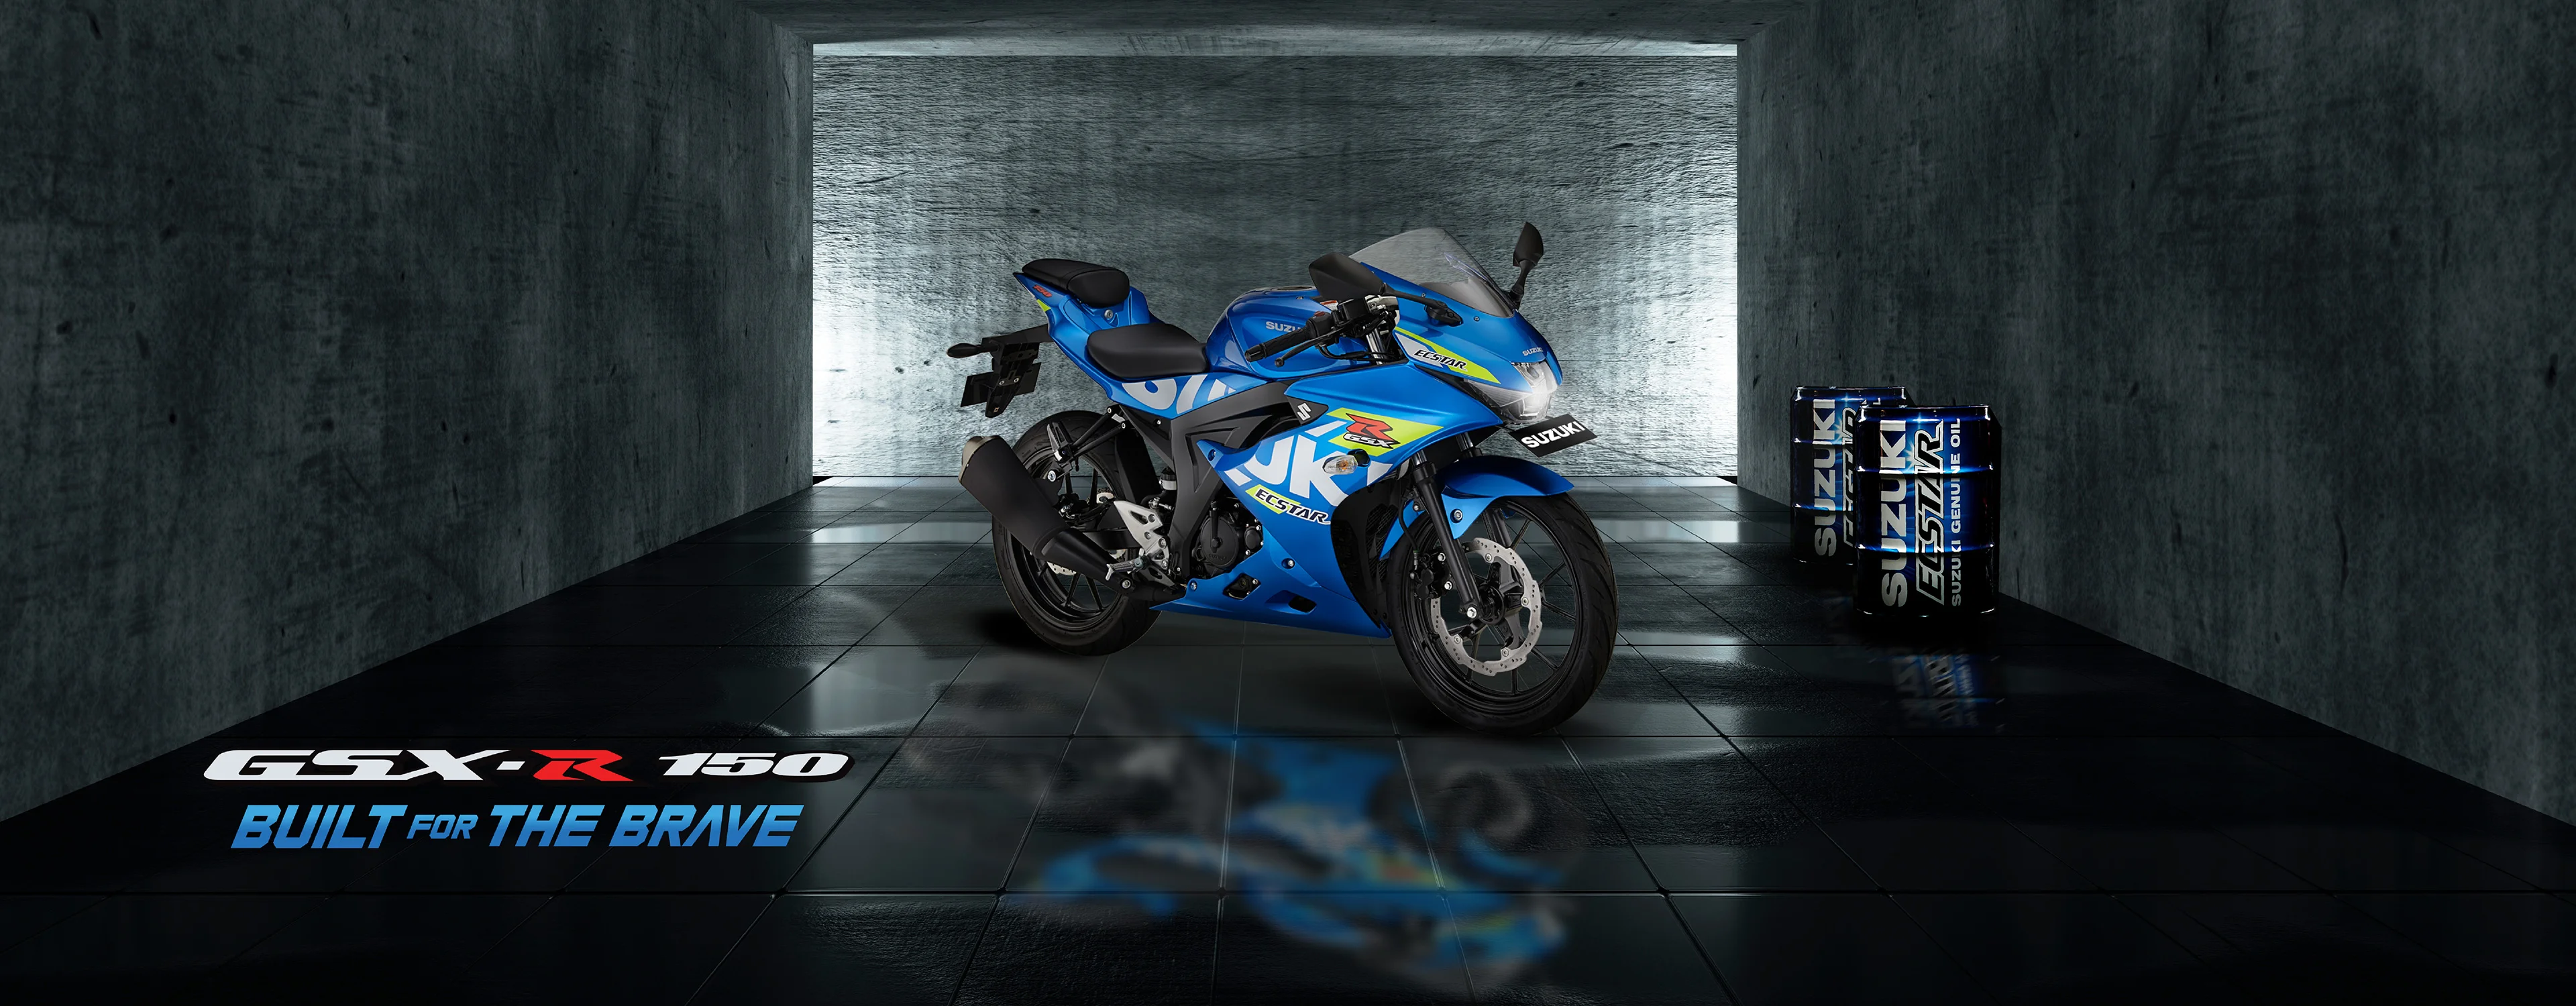 product-motorcycle gsx-r150